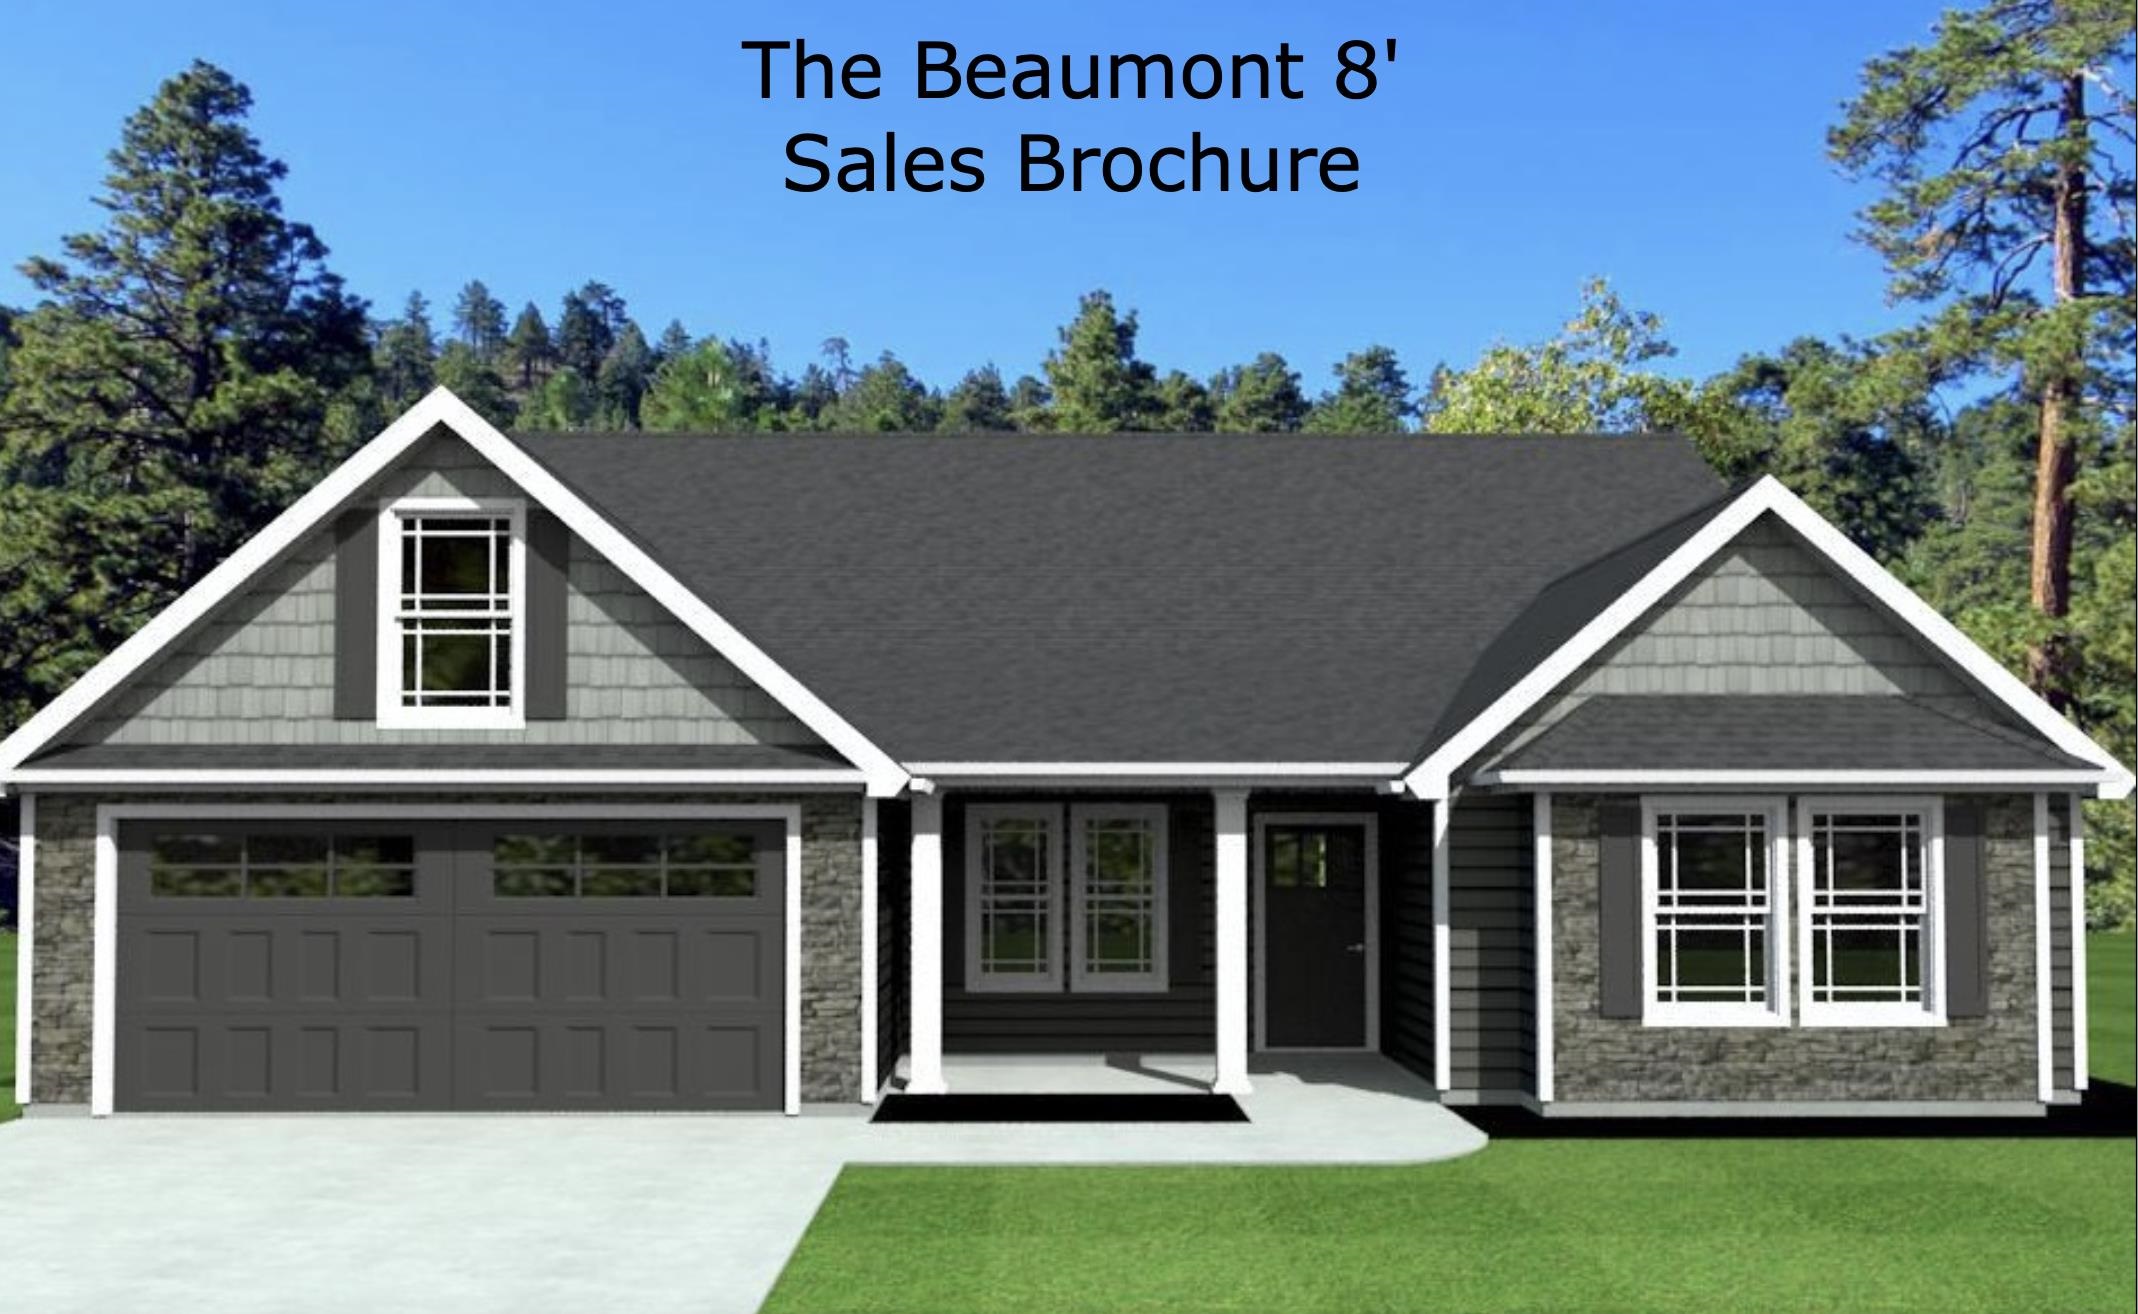 The Beaumont plan.  This plan offers a split bedroom, open concept layout with a spacious kitchen/dining that opens to a large living room with corner fireplace. Sunroom, Bonus Room, and covered patio off the master suite. Spacious walk-in master suite with double vanity, walk-in shower, and jetted tub! Complete with the builder's signature chair rail, crown molding and rope lighting! 12'x12' Covered Patio overlooking a .85 acre lot. Lot 11.